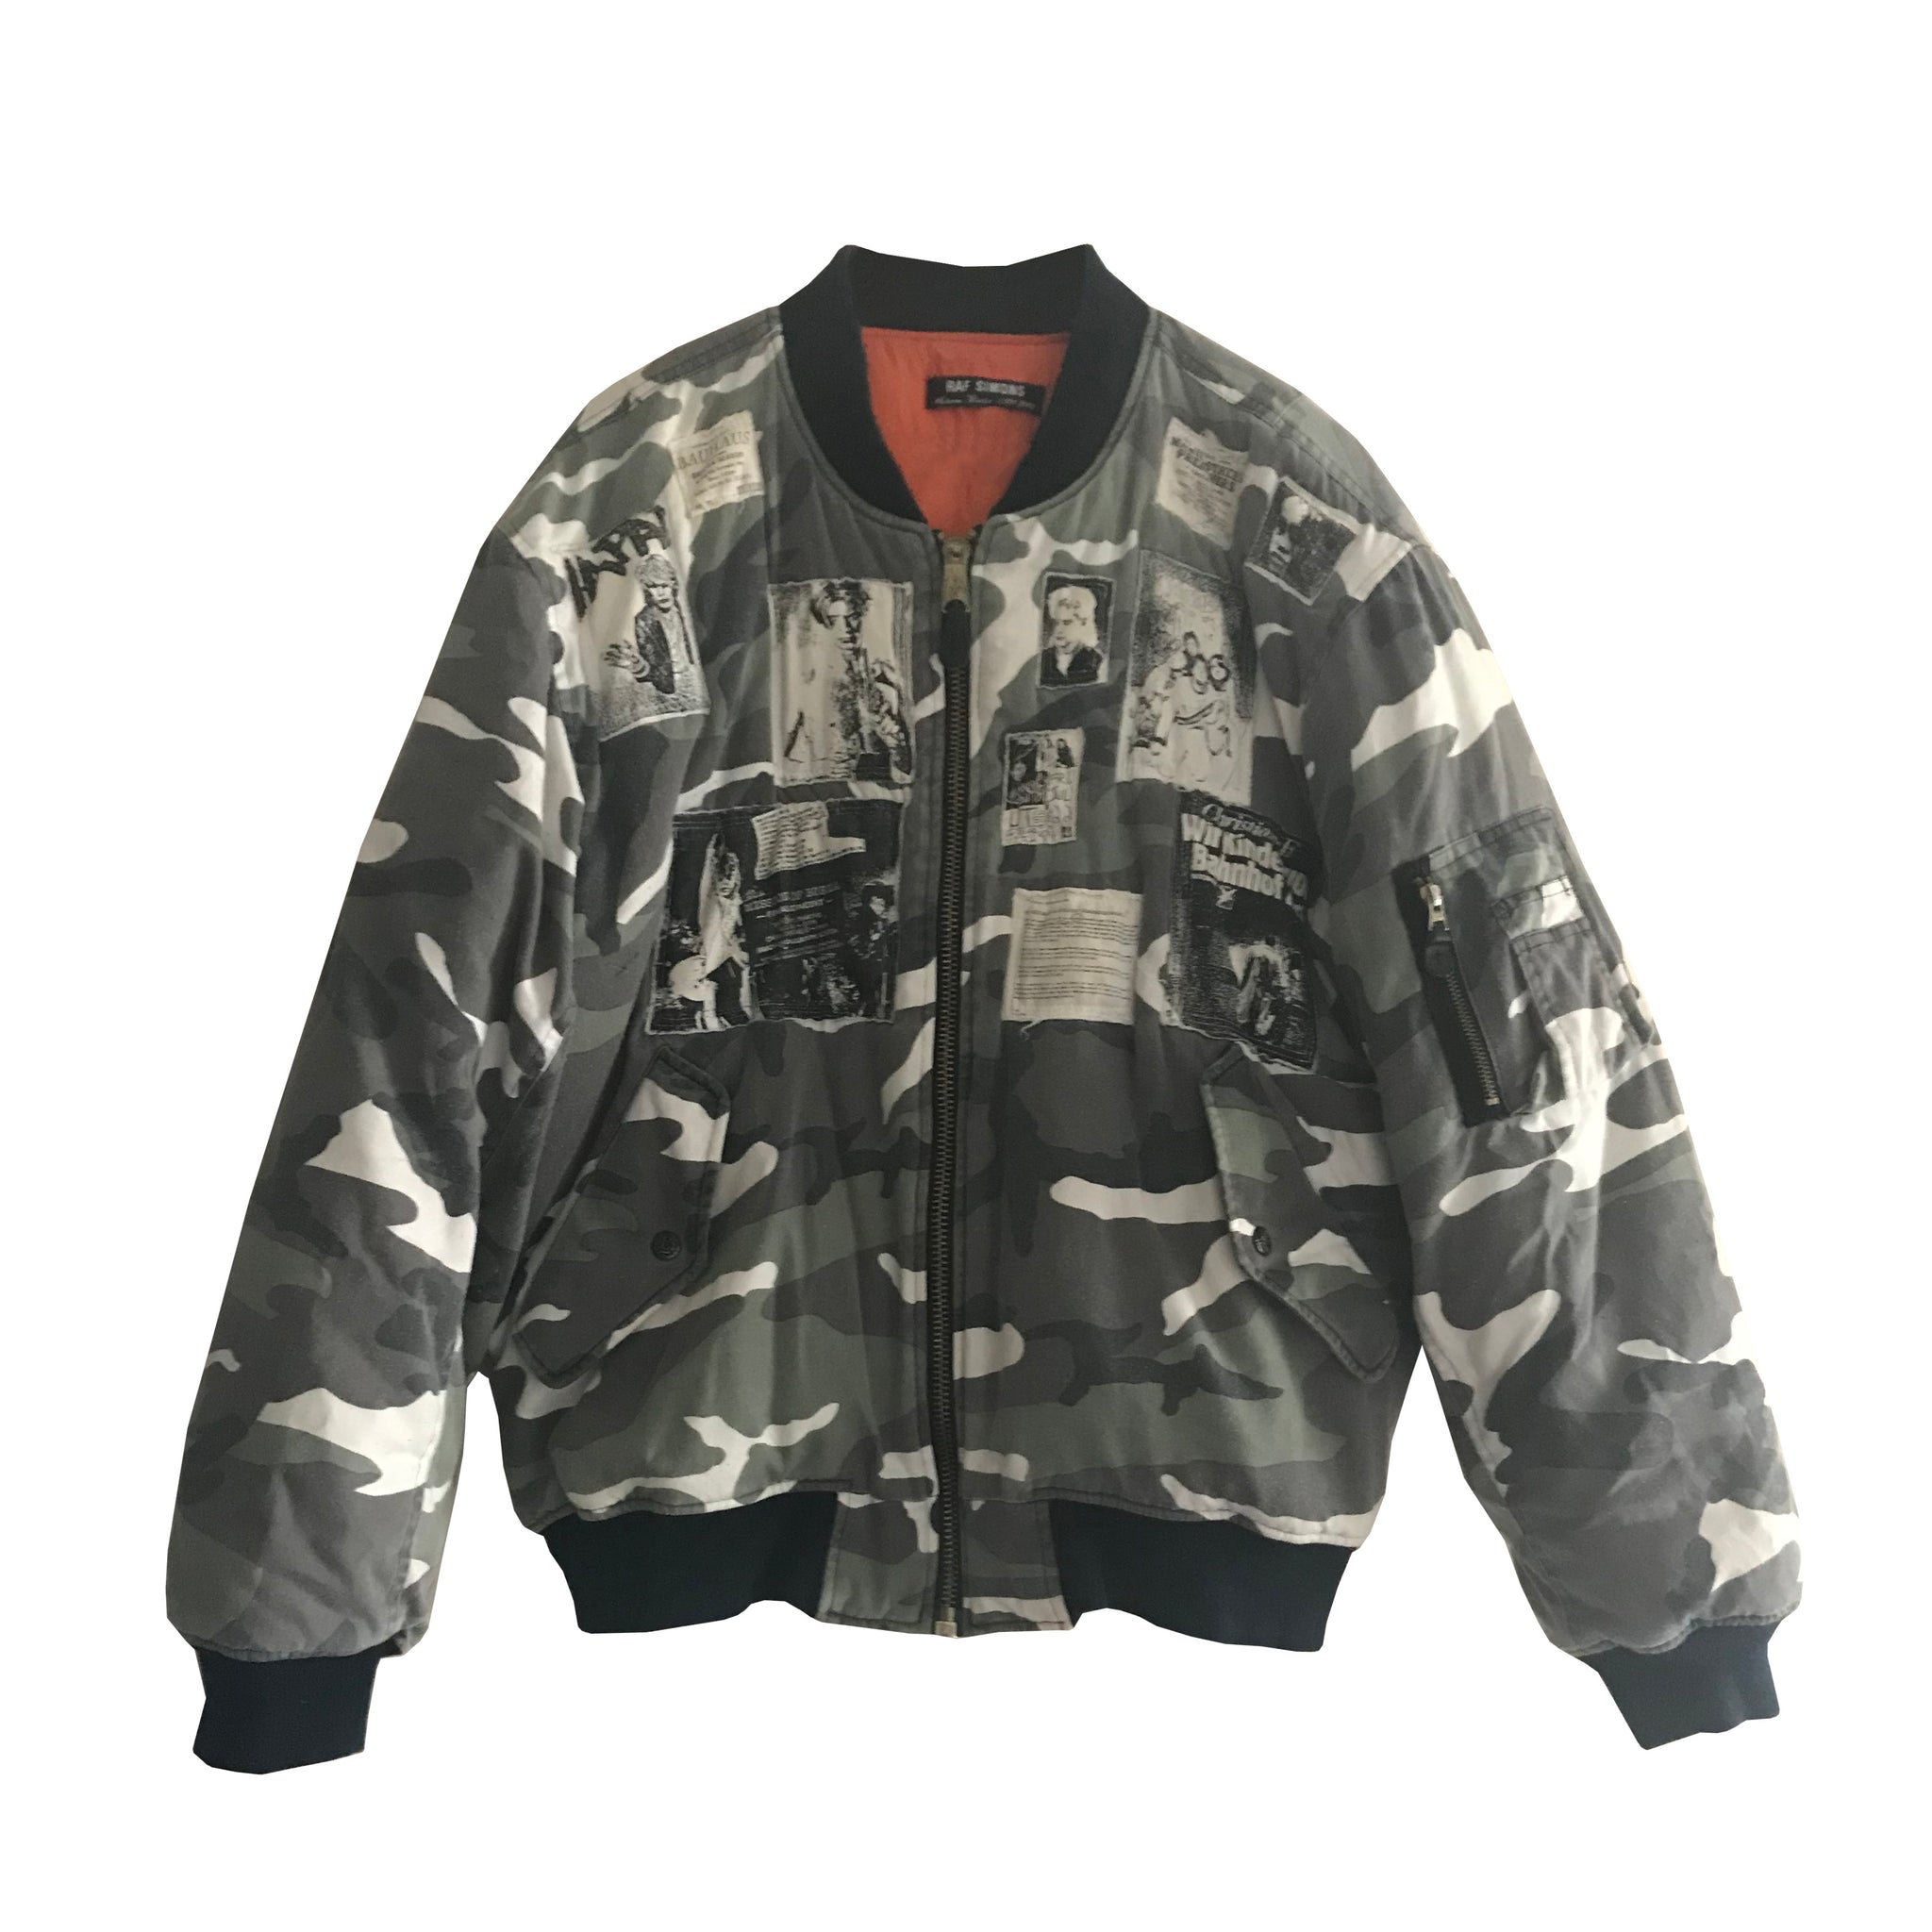 A/W01 'Riot Riot Riot' Camo Bomber by Raf Simons – The Salvages